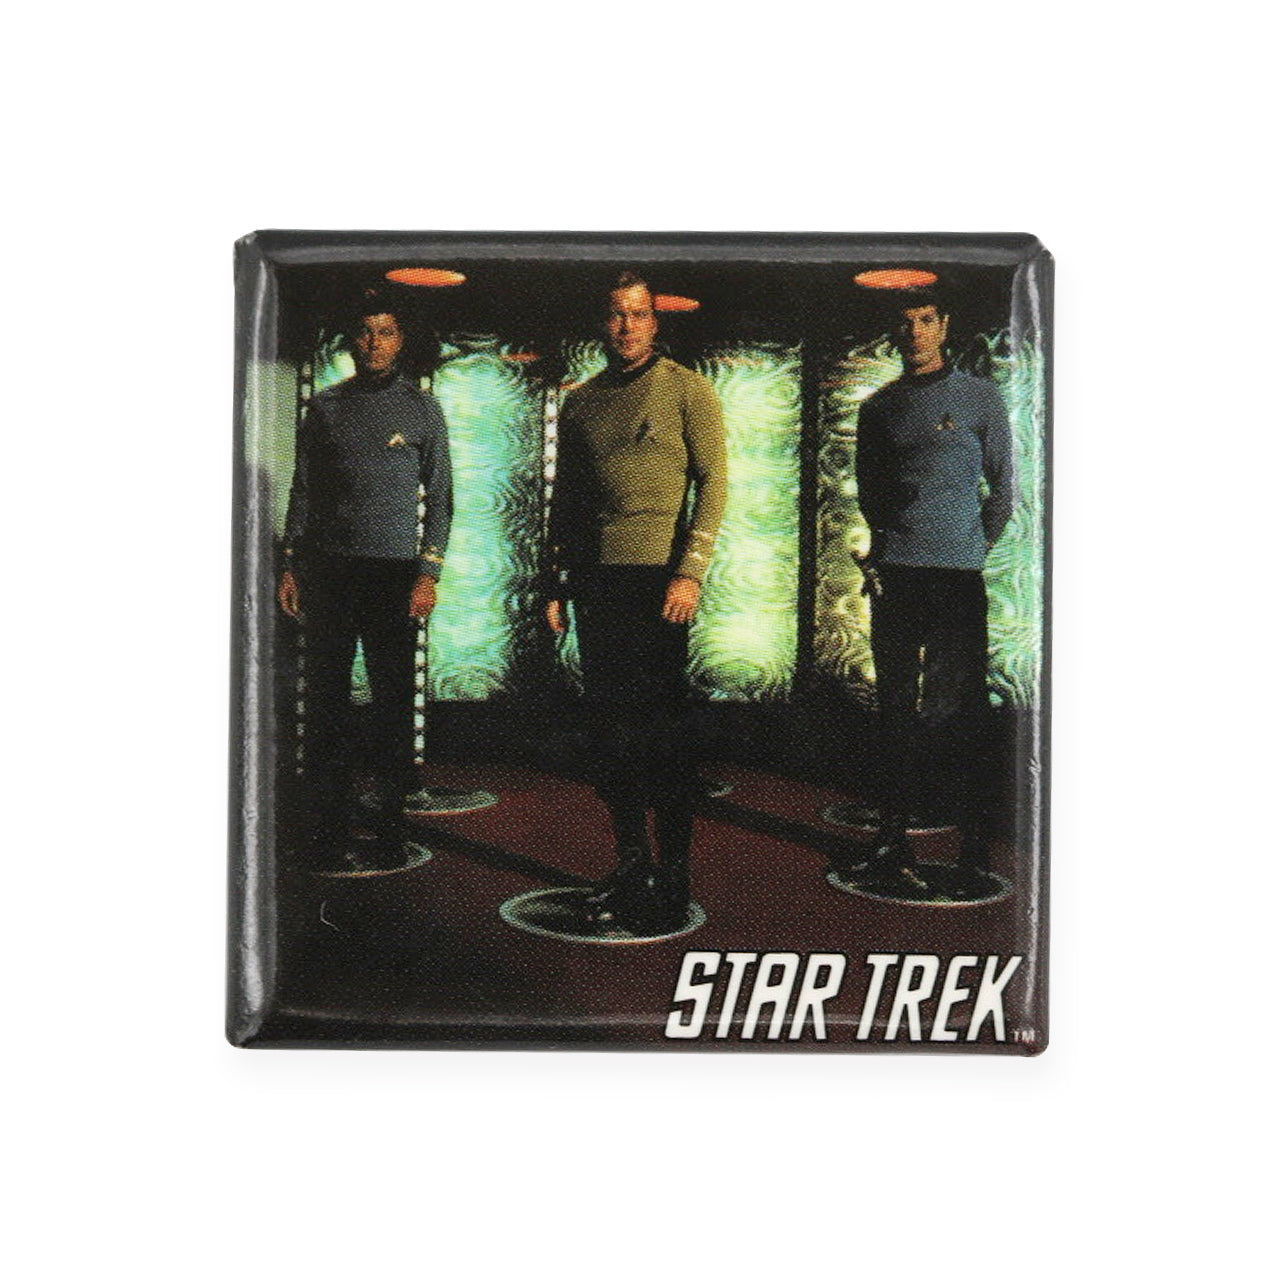 Vintage Beam Me Up Scotty Pinback Button  Add a little flair to your jacket, backpack or tote with this Vintage Beam Me Up Scotty Pinback Button! This button depicts Captain Kirk, Spock, and Doctor McCoy standing on transport pads aboard the S.S. Enterprise.  Measures 1.5 x 1.5 inches.